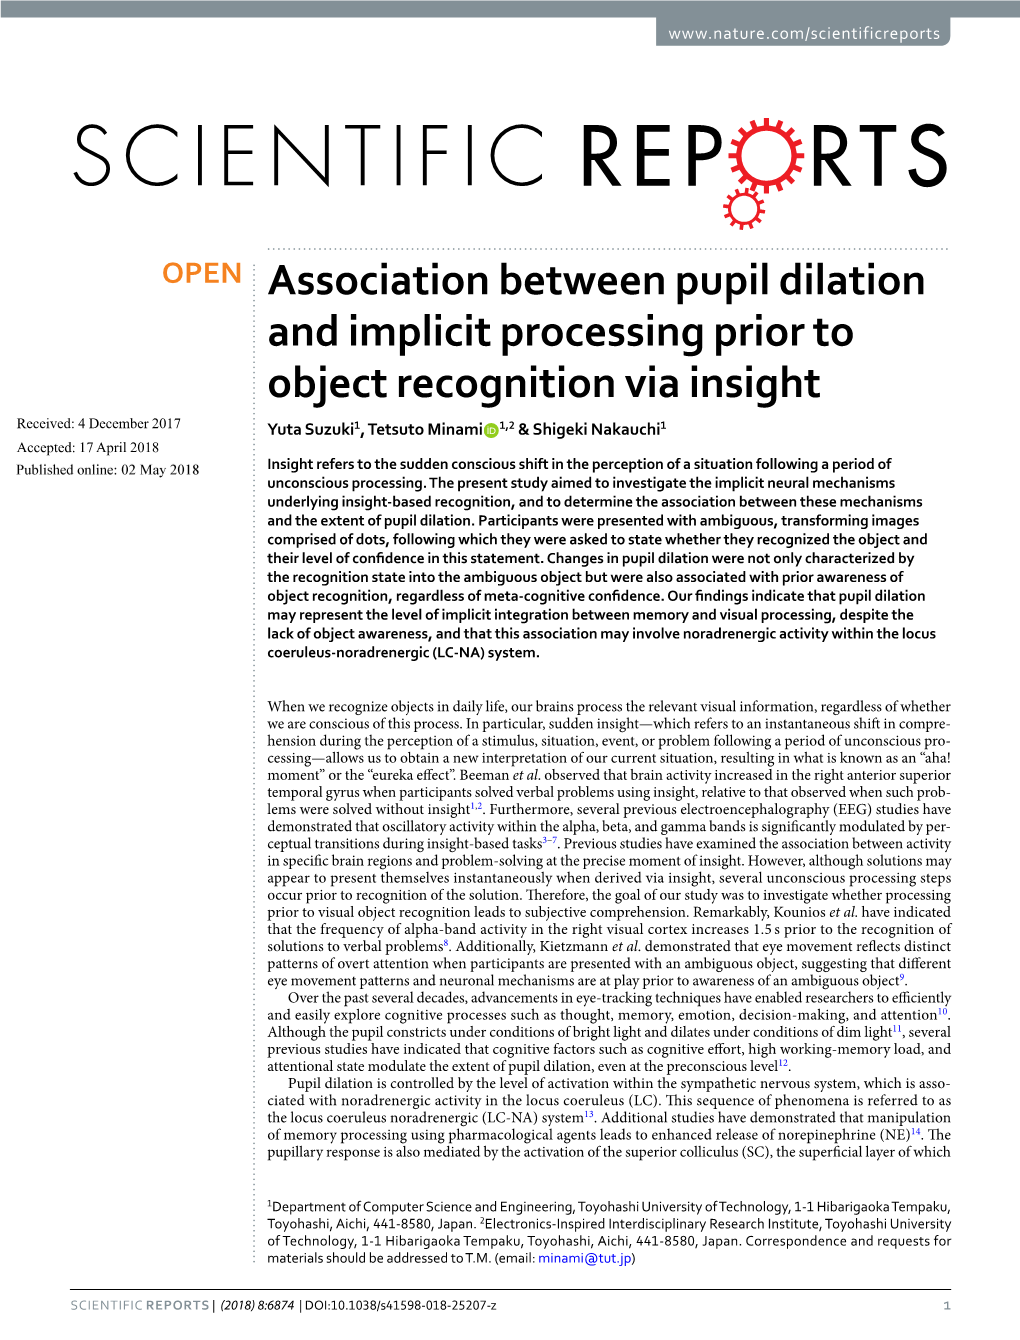 Association Between Pupil Dilation and Implicit Processing Prior To